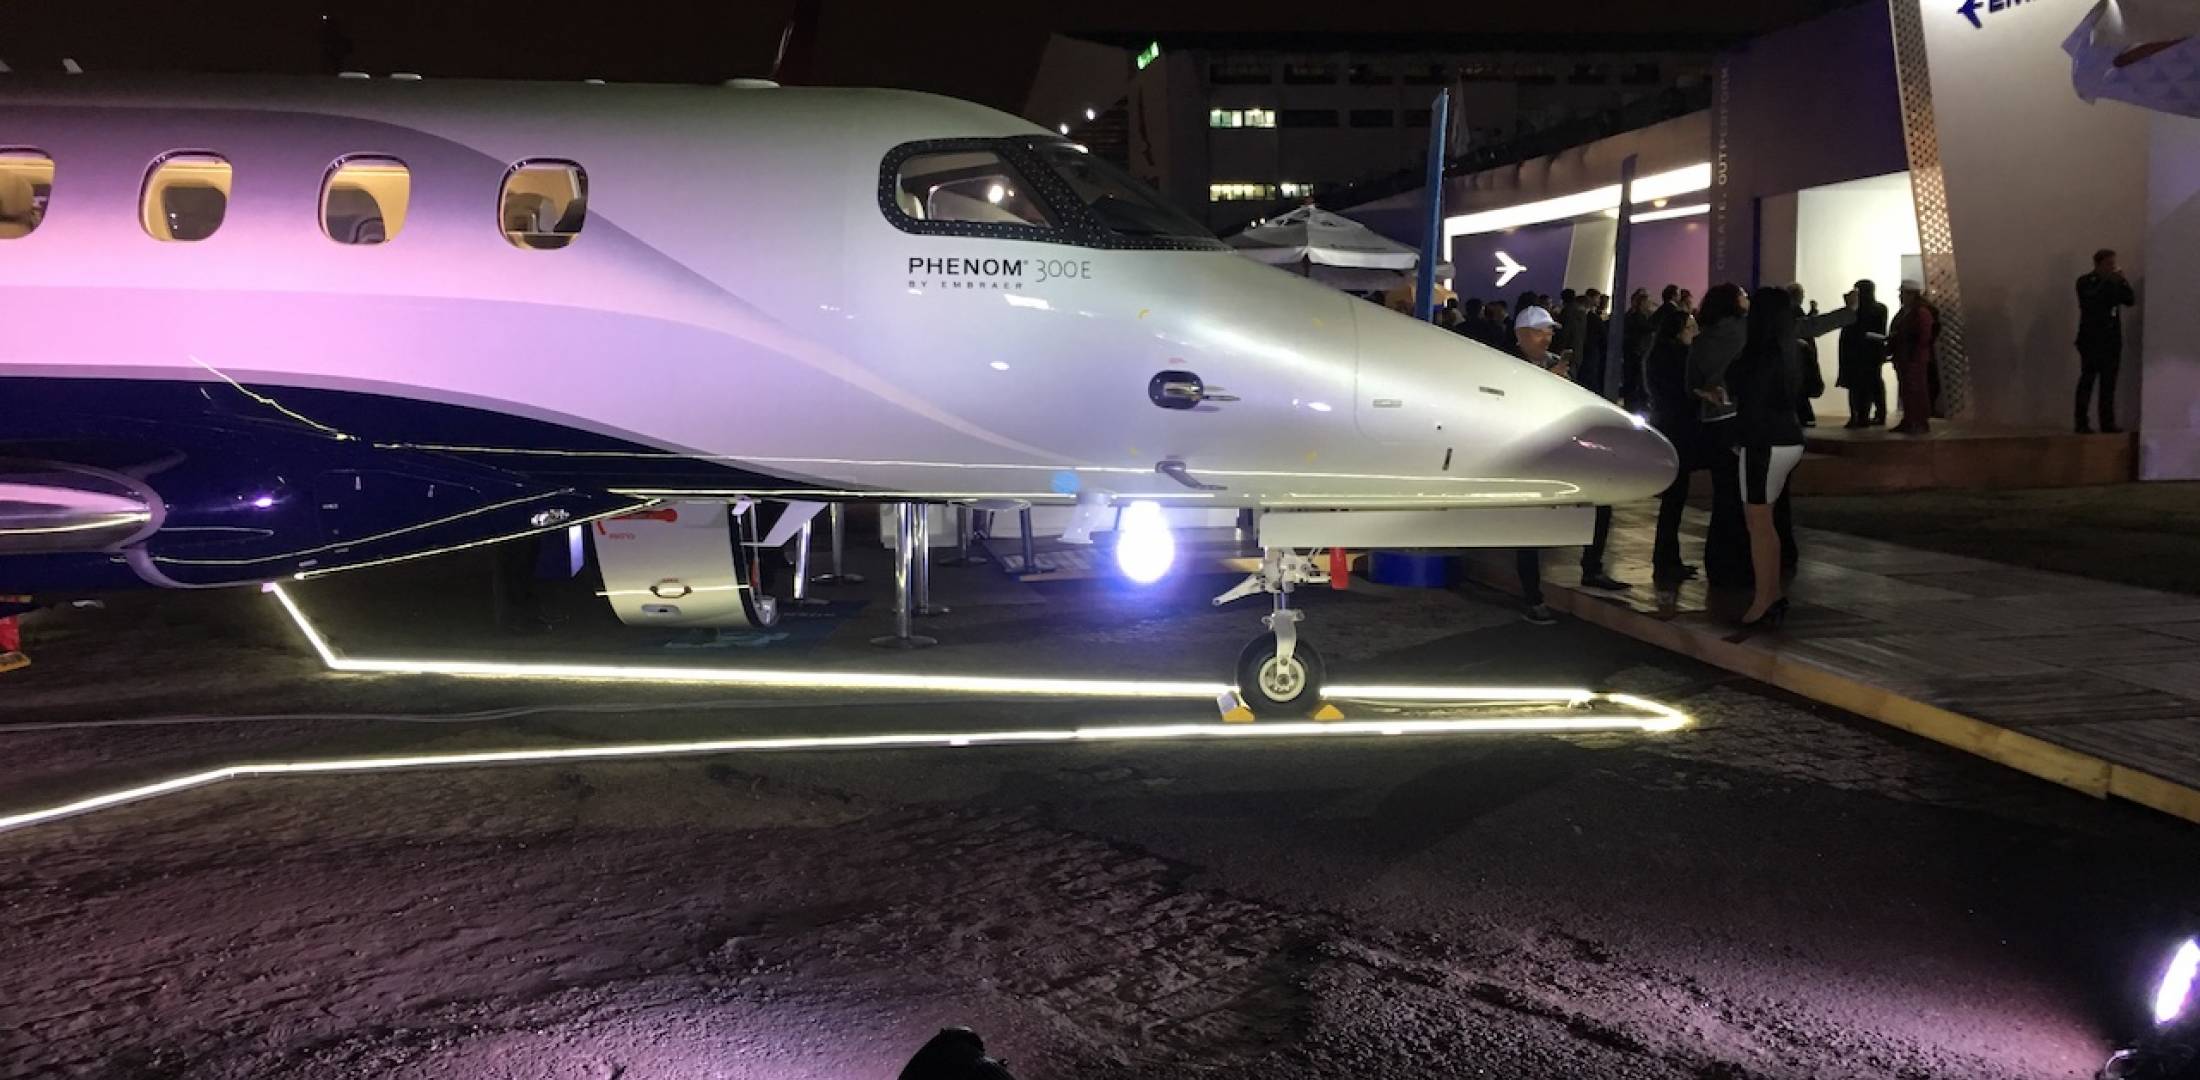 Embraer Phenom 300E on static display at 2018 LABACE show Congonhas Airport, San Paulo, Brazil illuminated at night and surrounded by event attendees